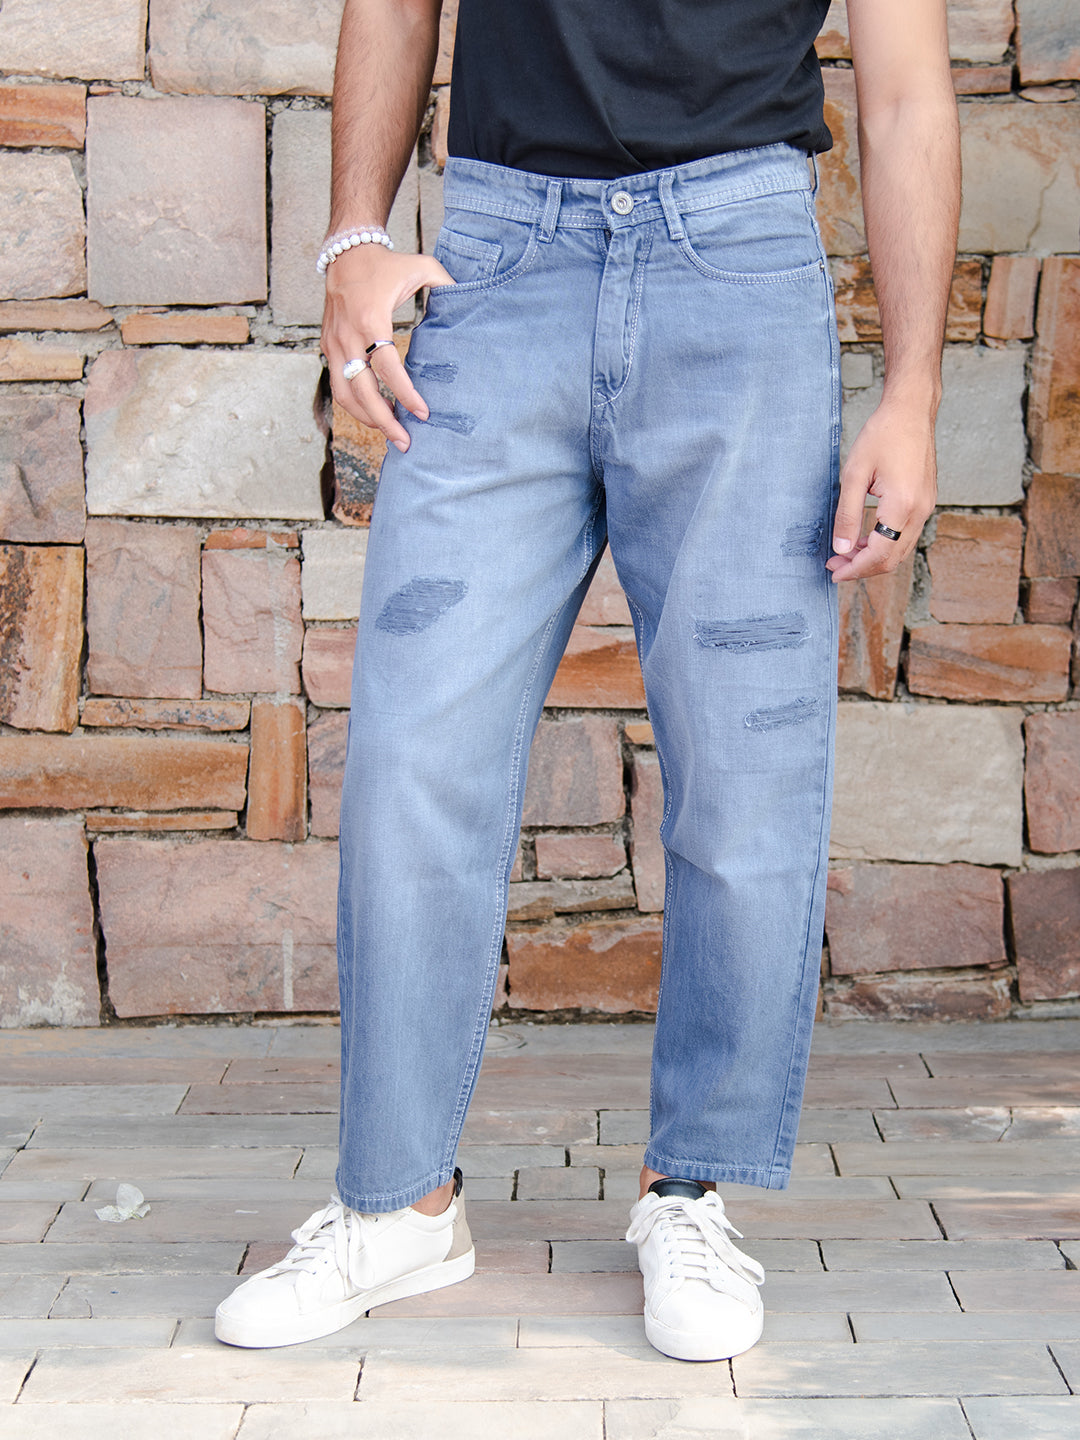 Men Jeans For Men - Buy Jeans For Men Online With Discounted Pricing At  Ketch